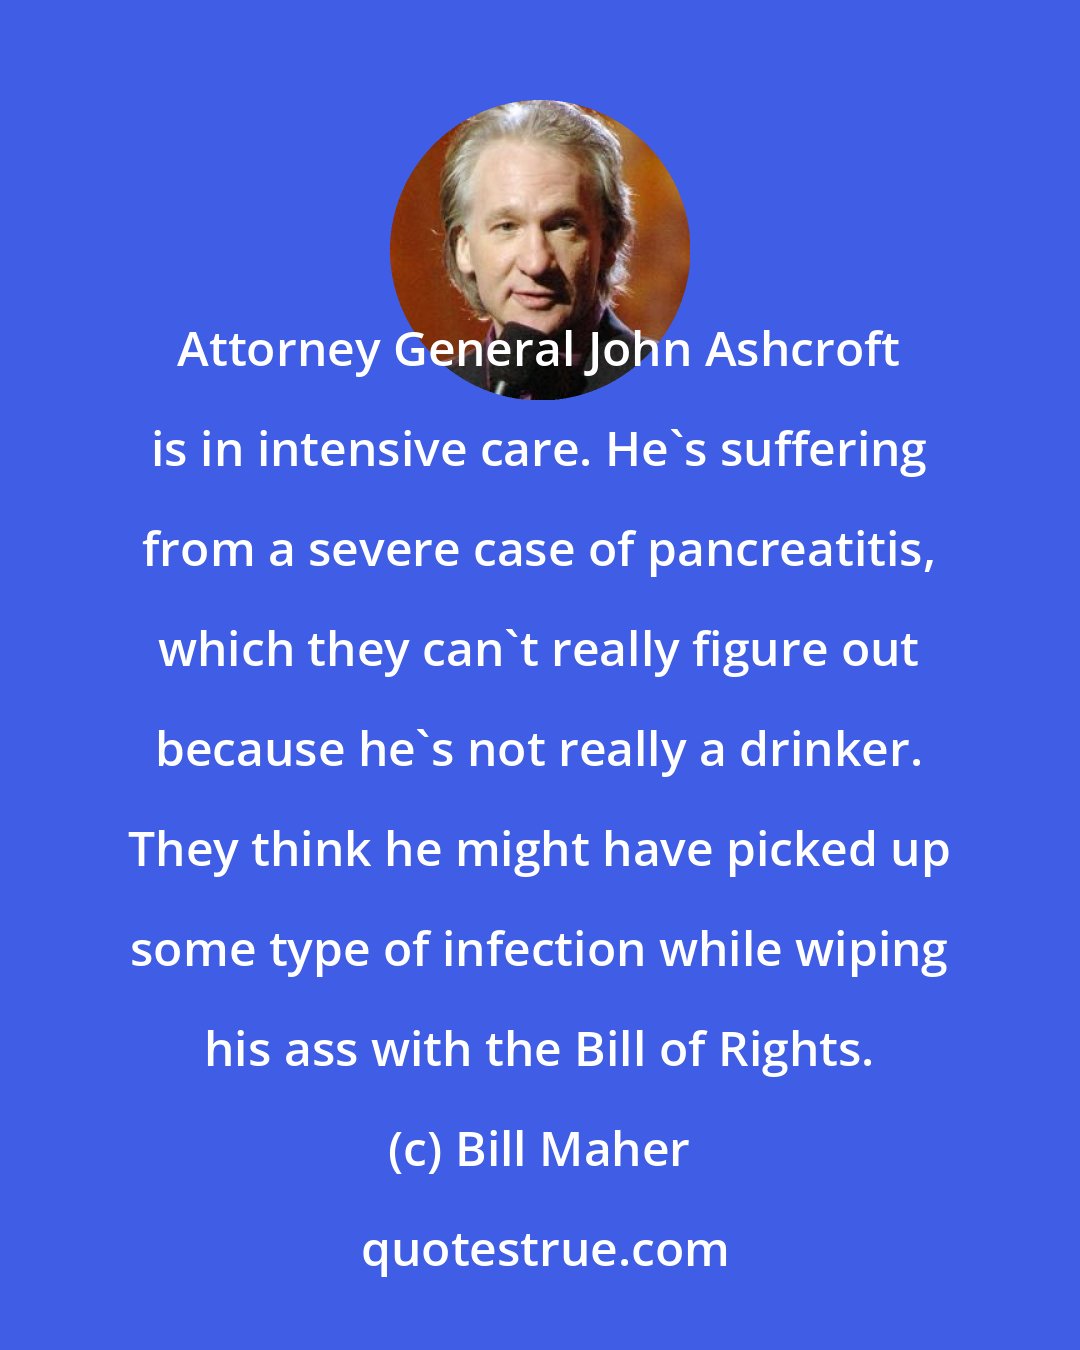 Bill Maher: Attorney General John Ashcroft is in intensive care. He's suffering from a severe case of pancreatitis, which they can't really figure out because he's not really a drinker. They think he might have picked up some type of infection while wiping his ass with the Bill of Rights.